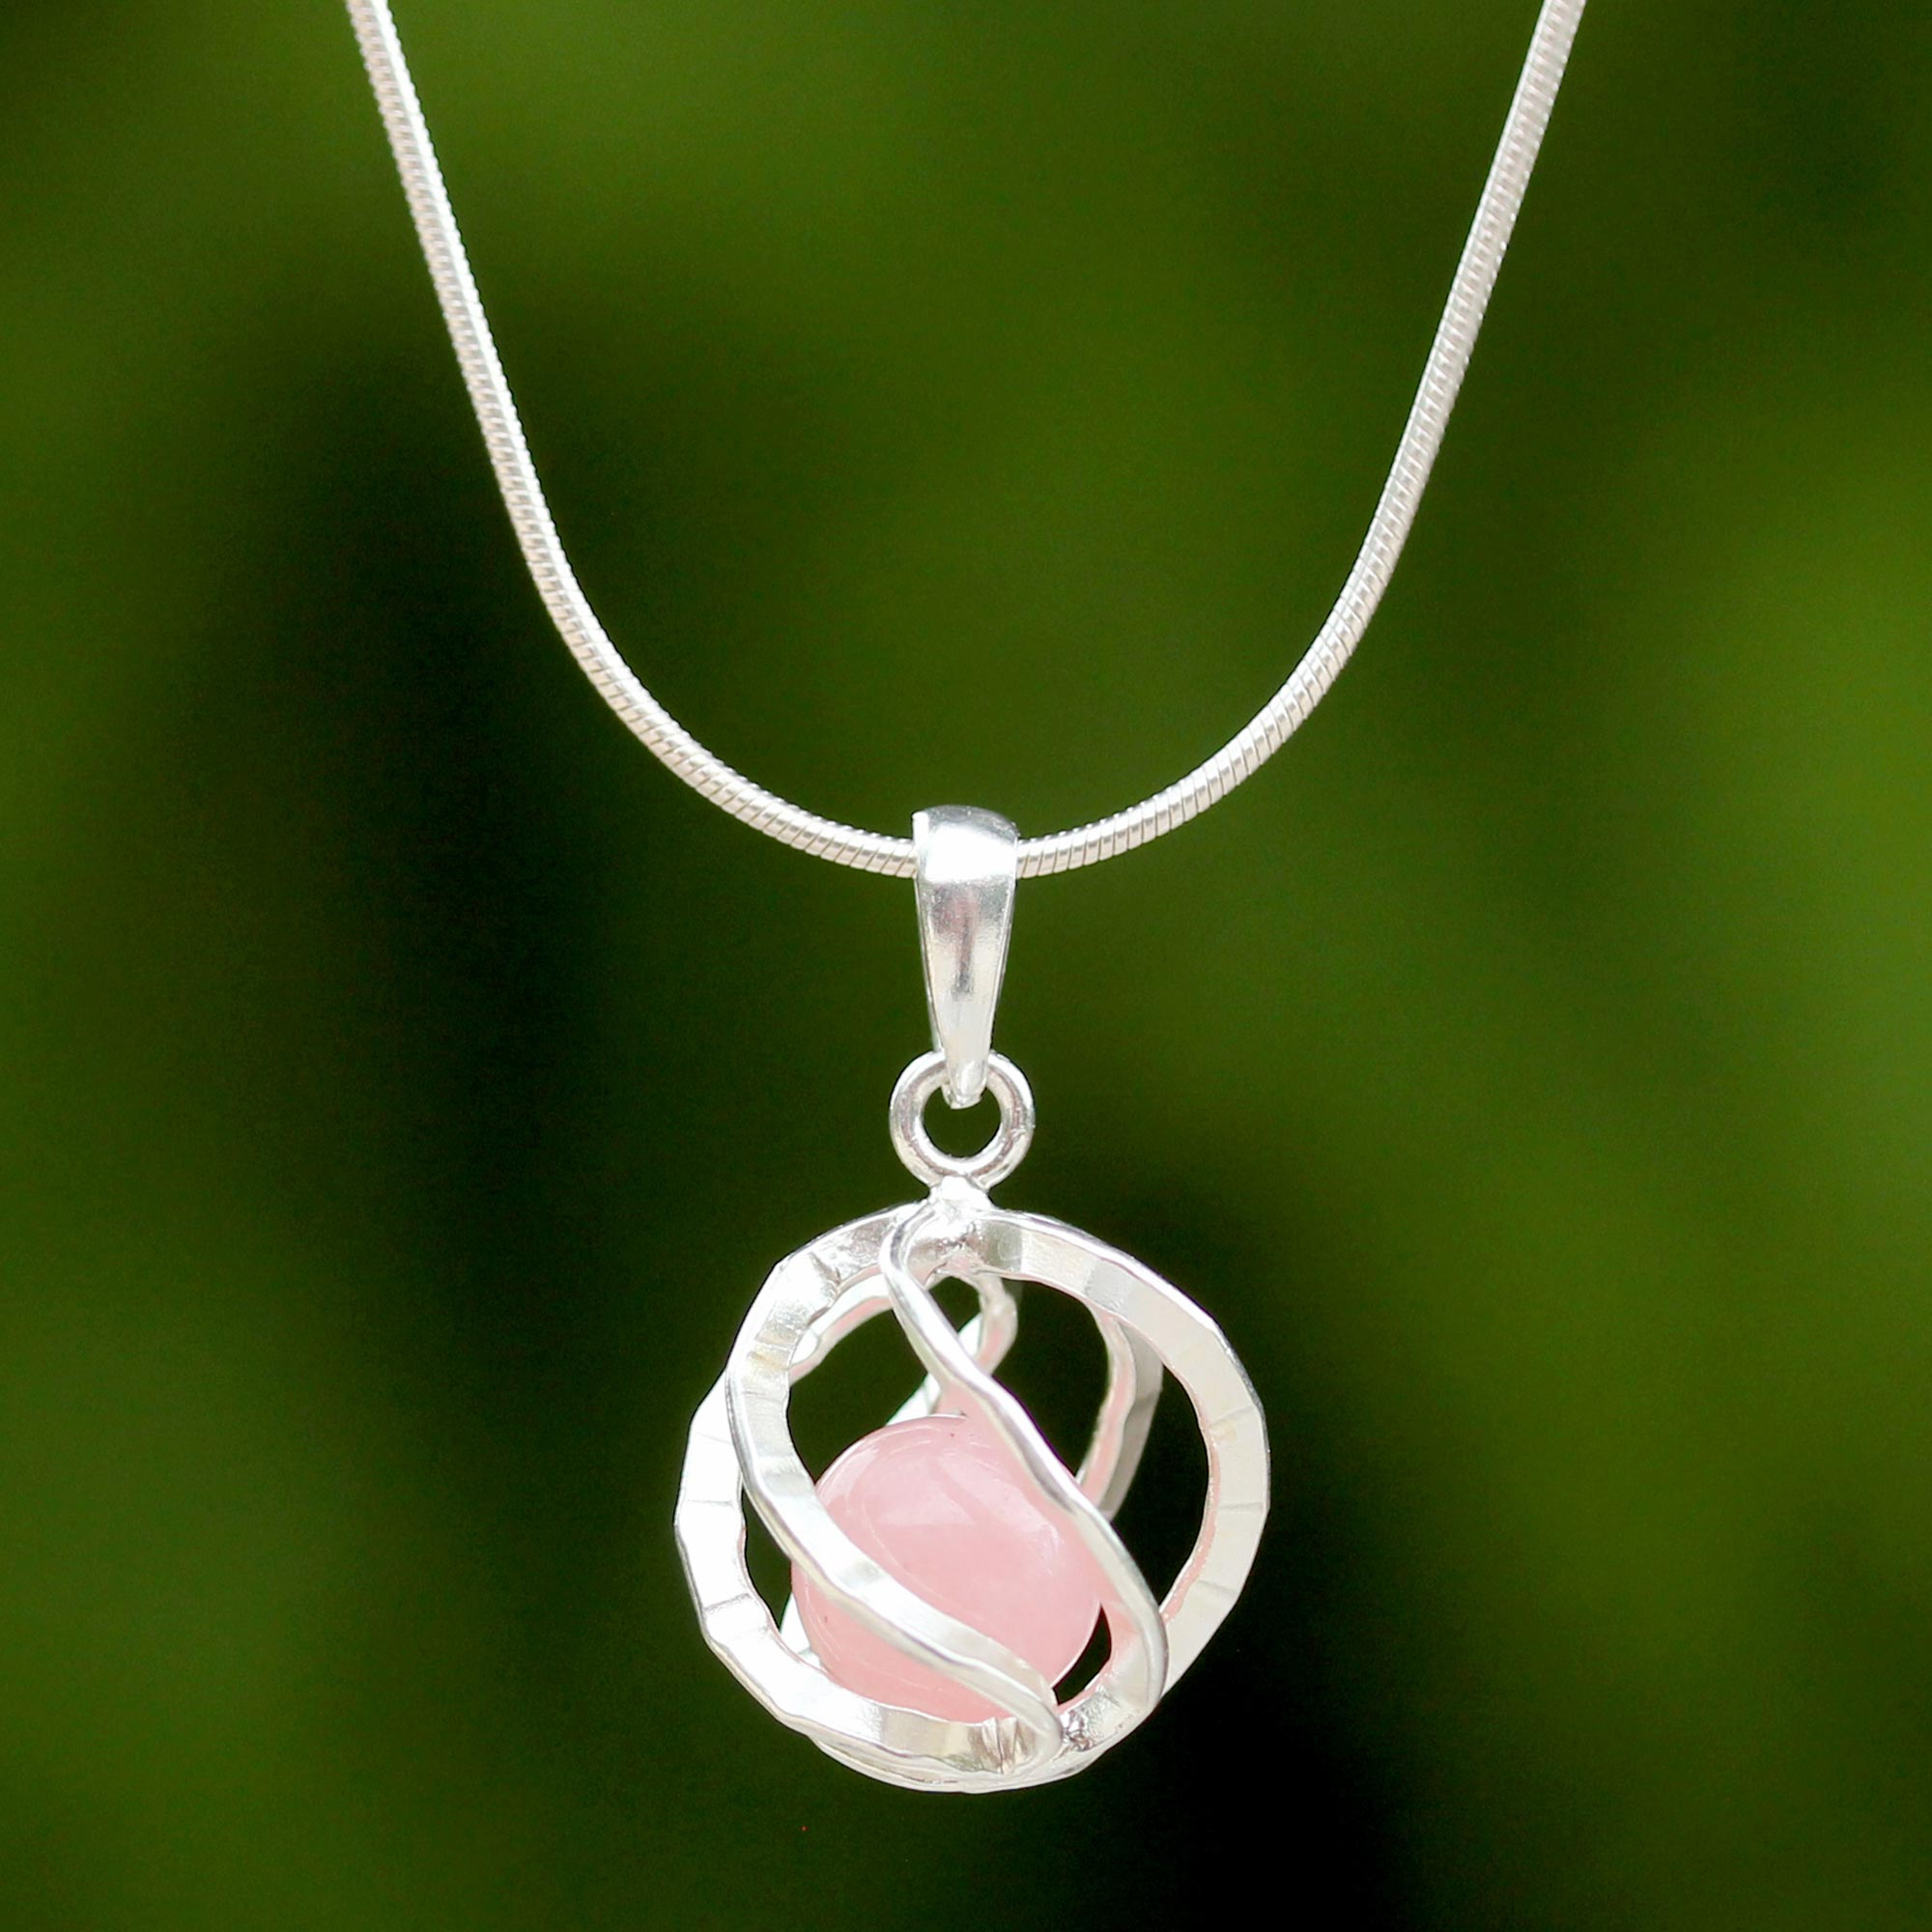 Sterling Silver Rose Quartz Pendant Necklace from Thailand - Pink 